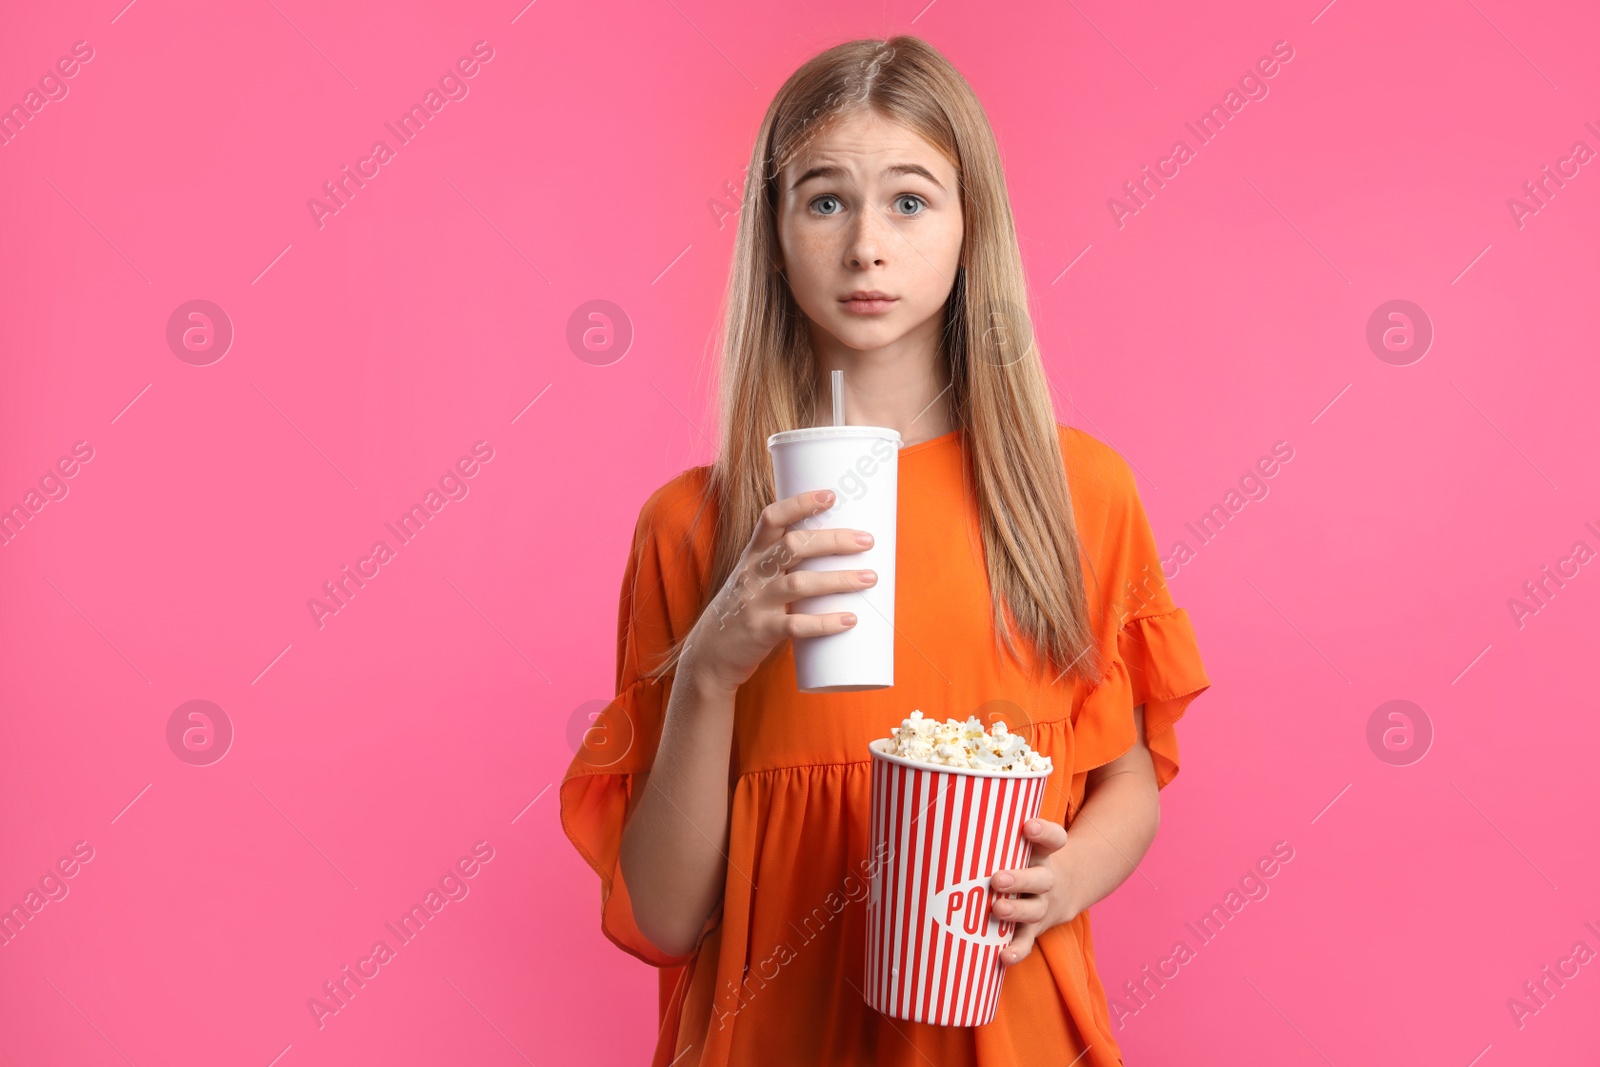 Photo of Emotional teenage girl with popcorn and beverage during cinema show on color background